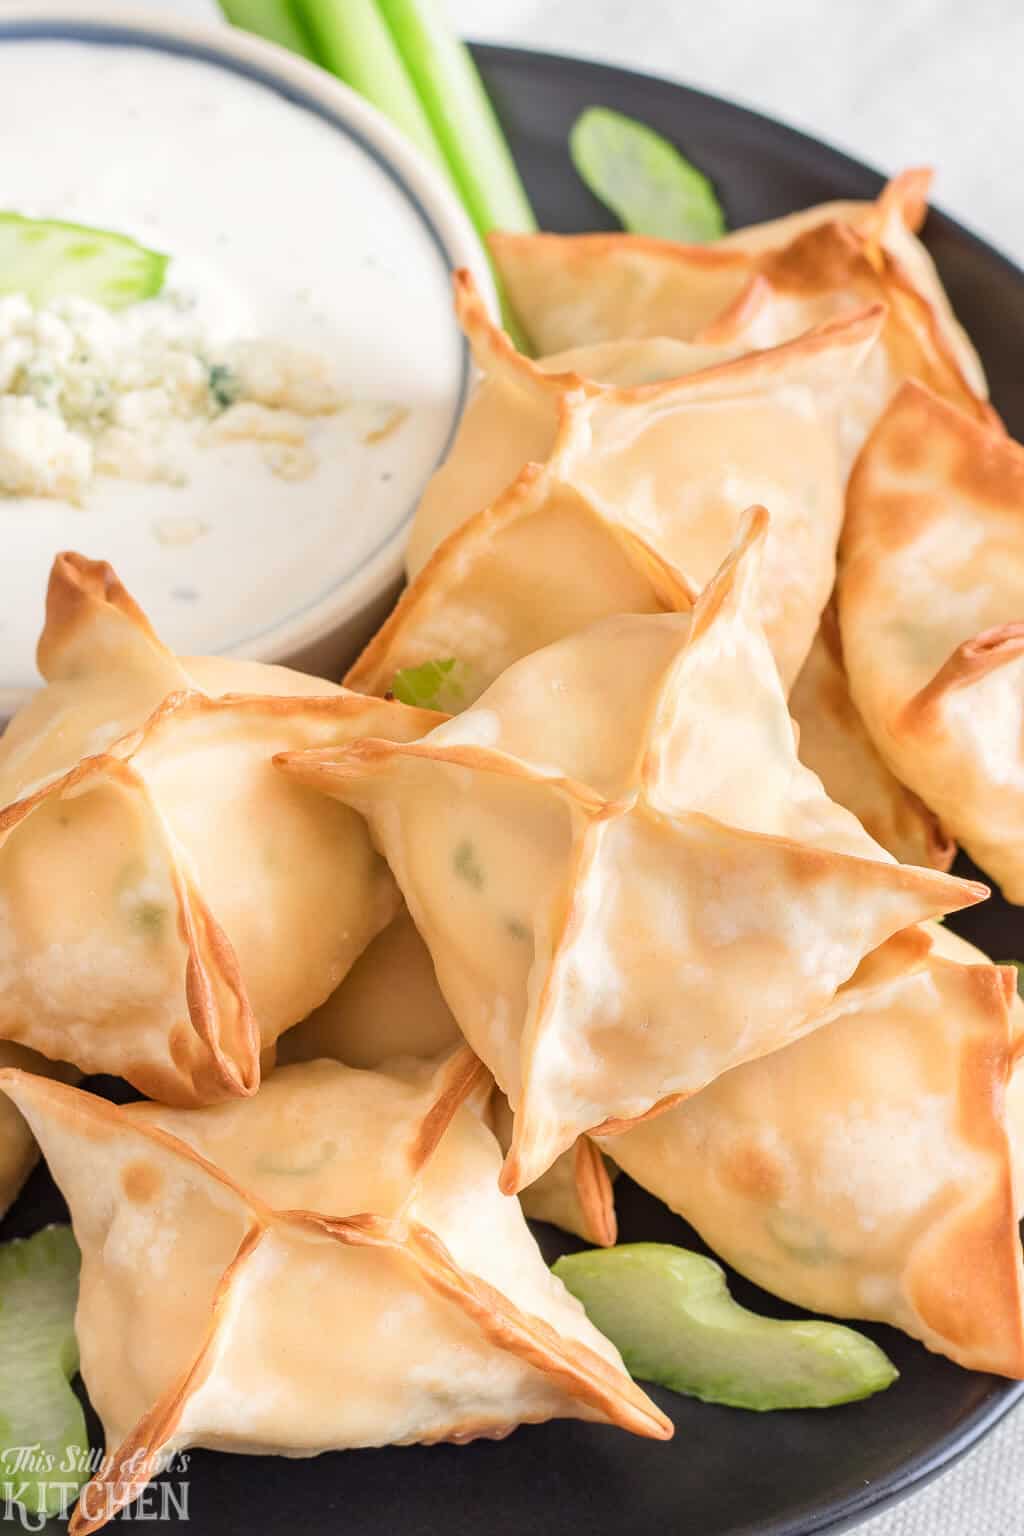 Buffalo Chicken Wontons, only 6 ingredients and ready in 15 minutes, perfect for game day! #Recipe from ThisSillyGirlsKitchen.com #buffalochicken #wontons #airfryer